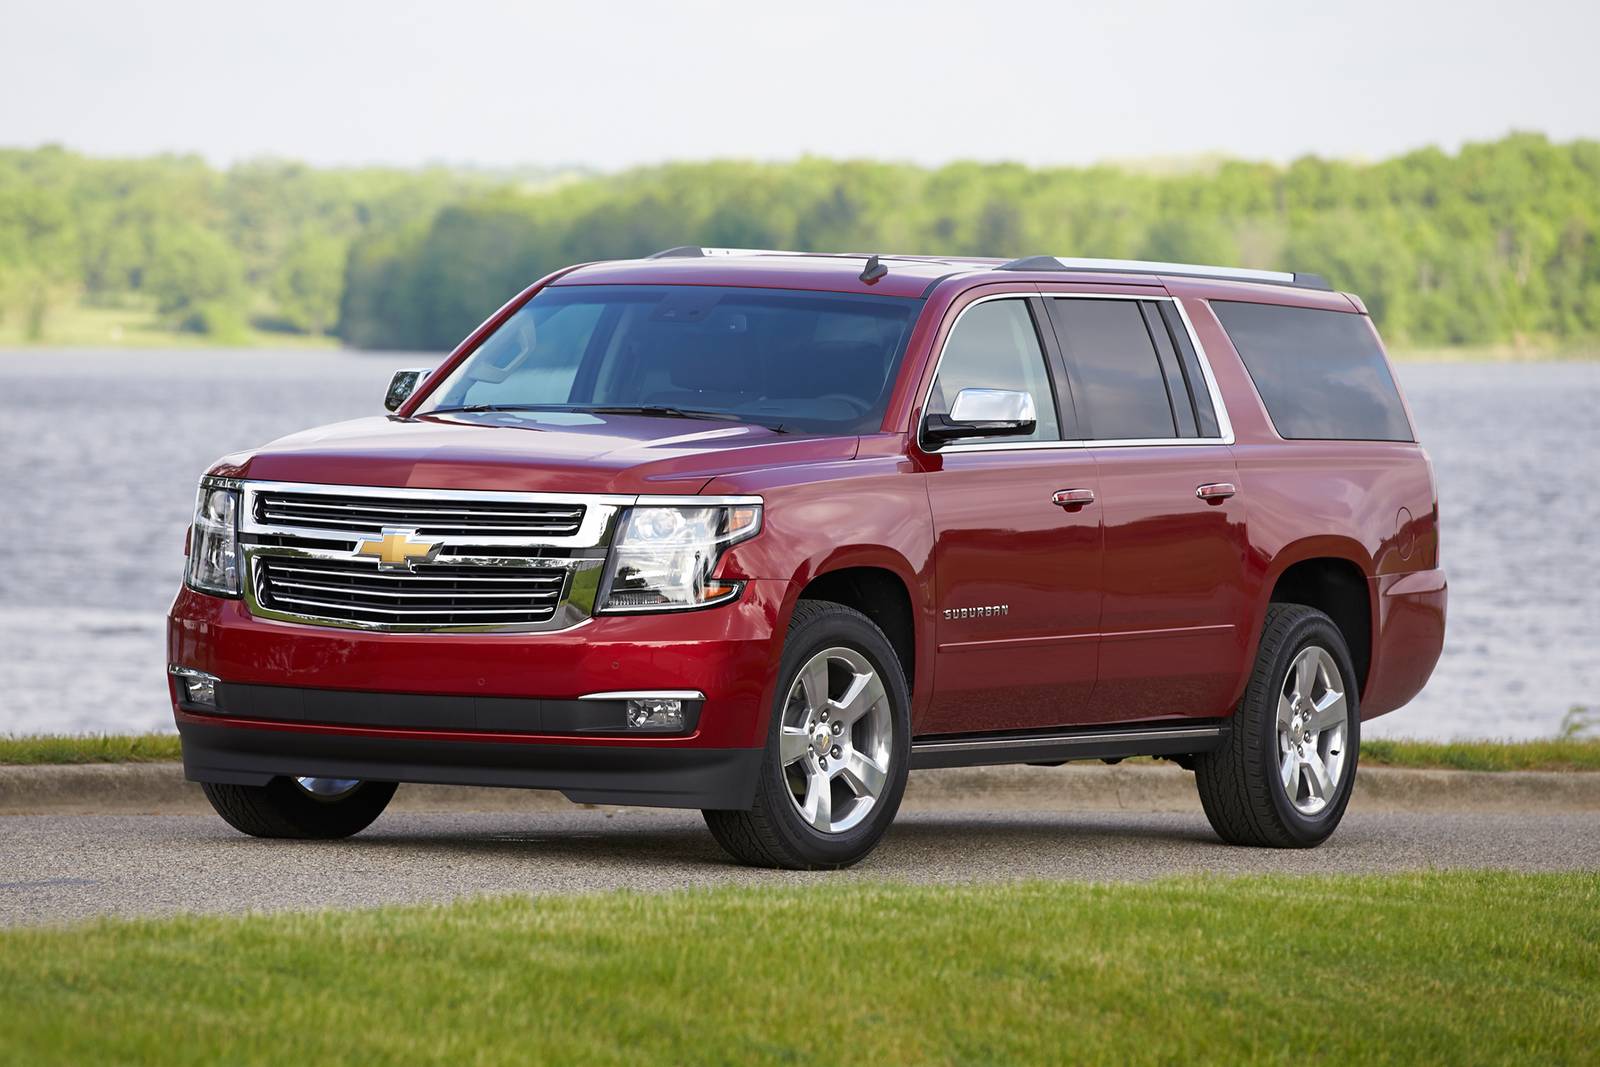 2018 Chevy Suburban Review & Ratings | Edmunds